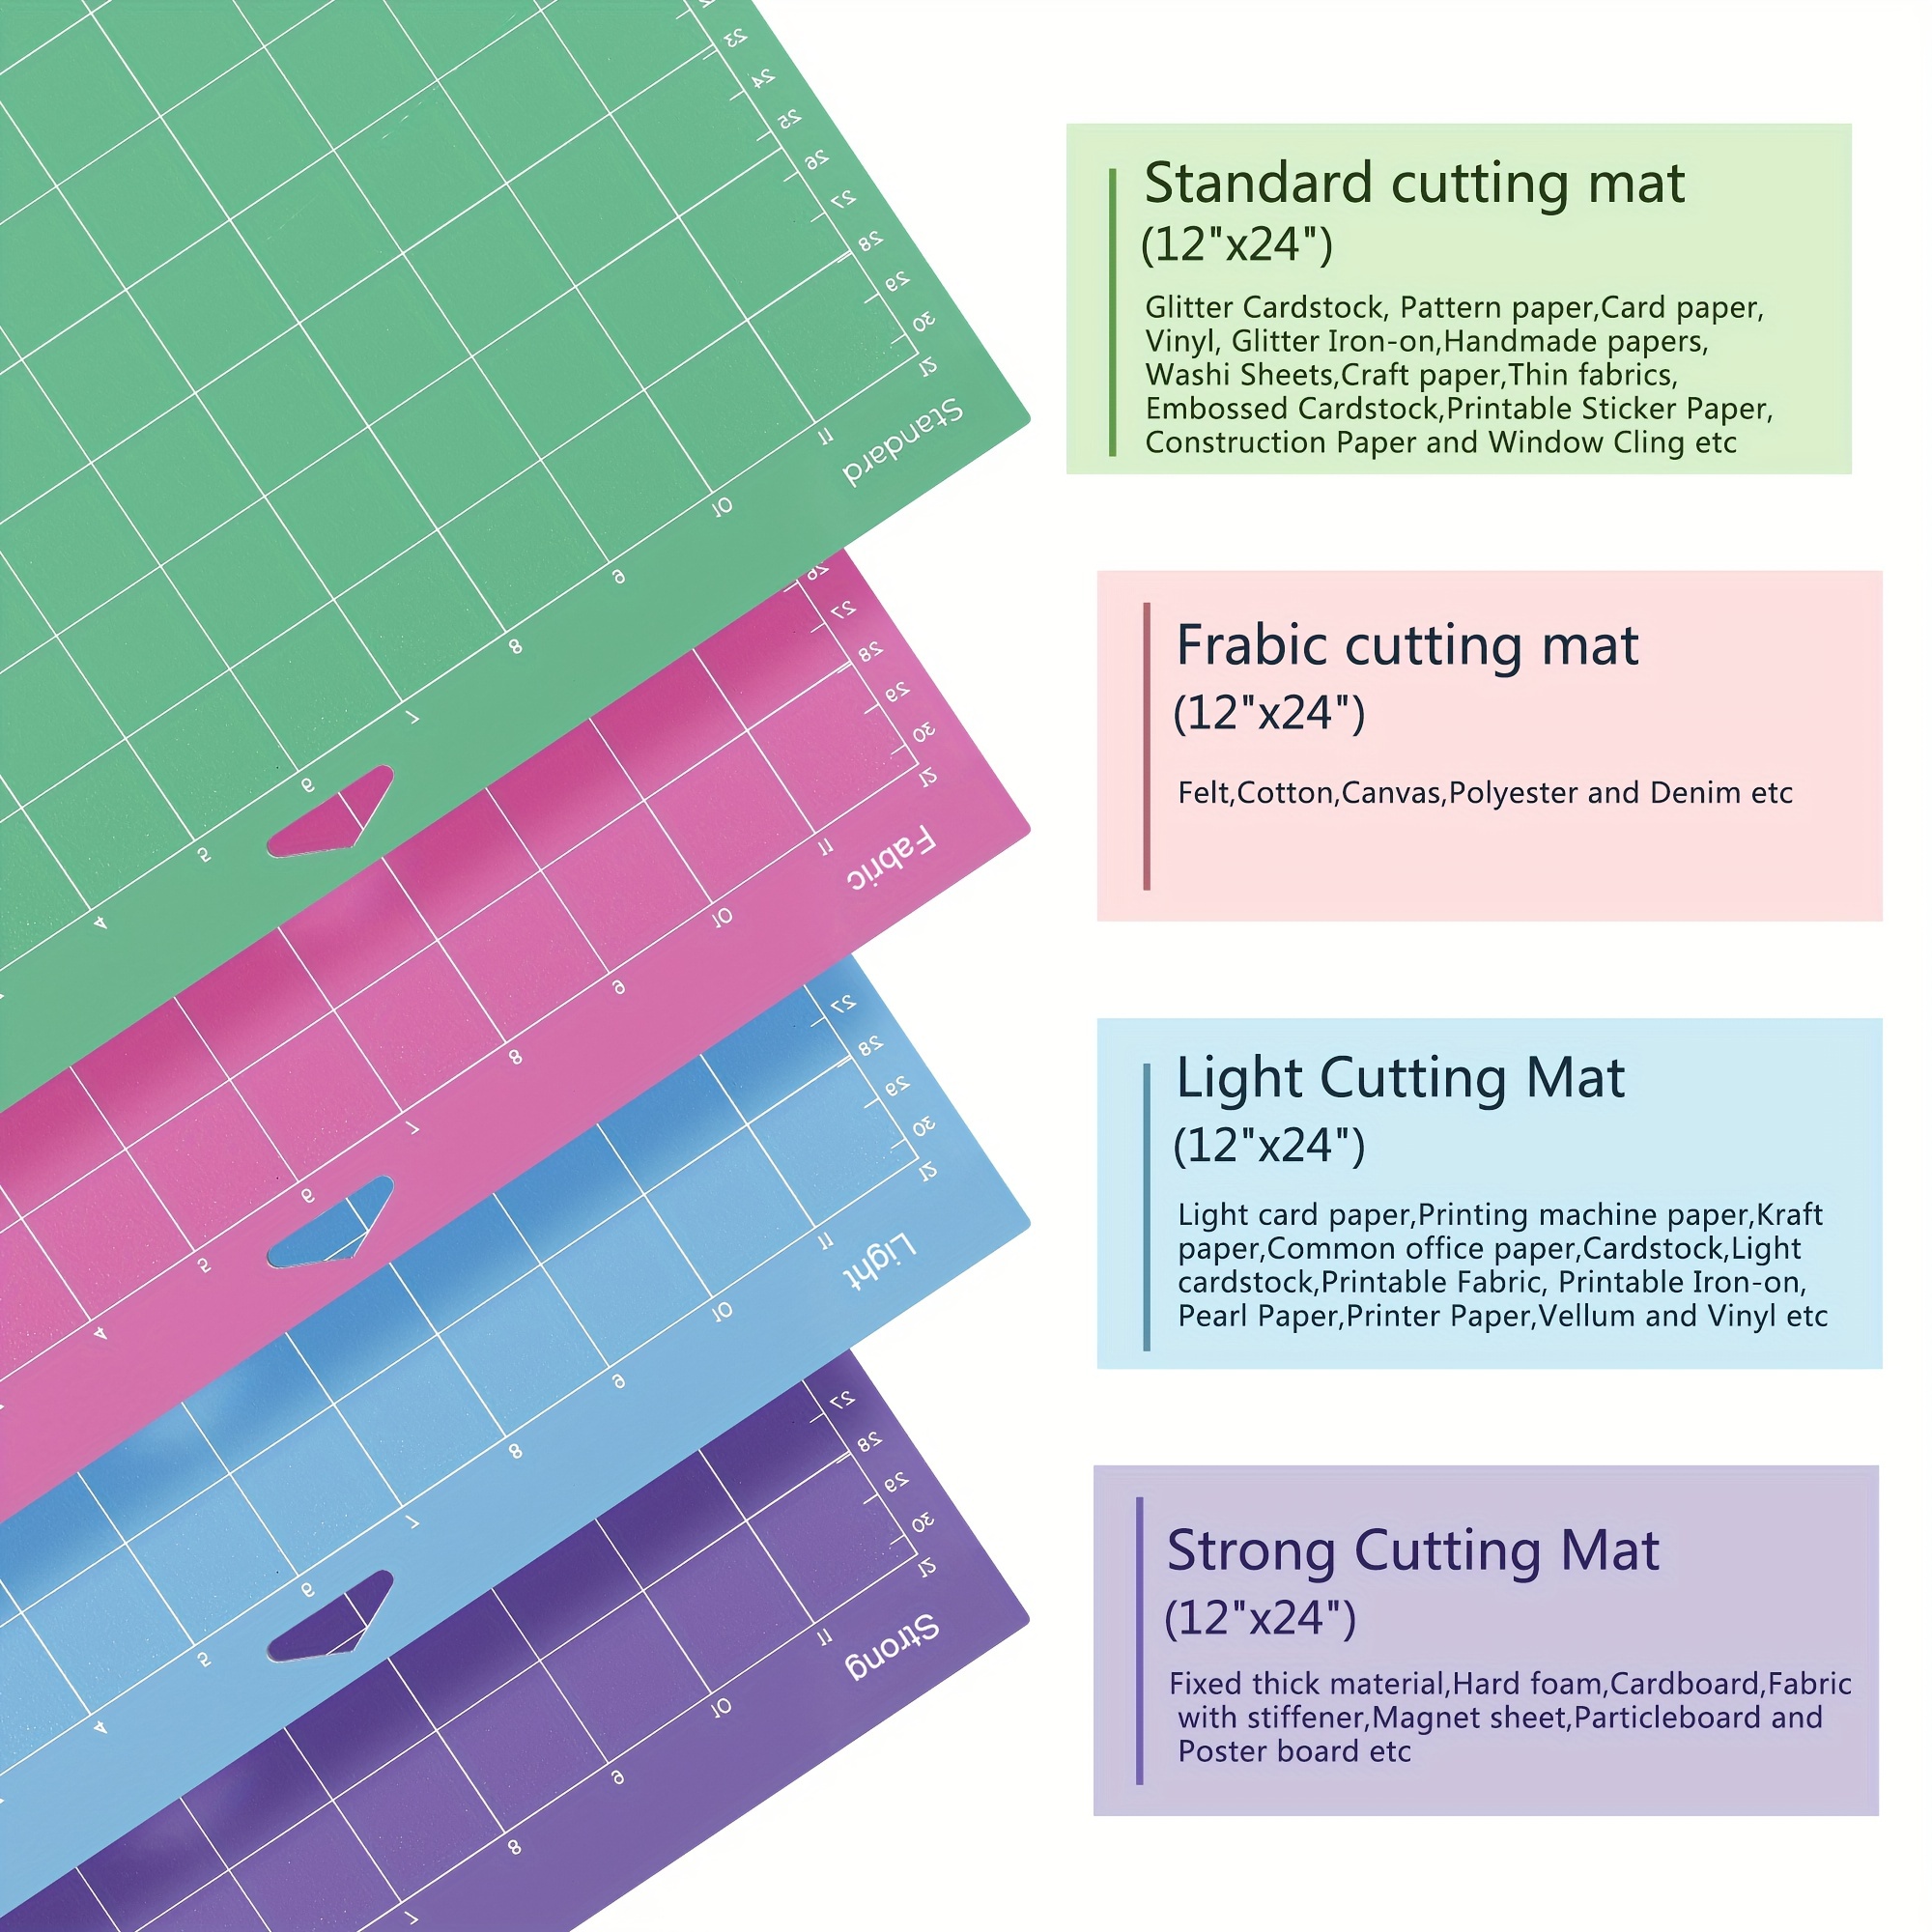 Cricut LightGrip Cutting Mats 12in x 12in, Reusable Cutting Mats for Crafts  with Protective Film, Use with Printer Paper, Vellum, Light Cardstock 